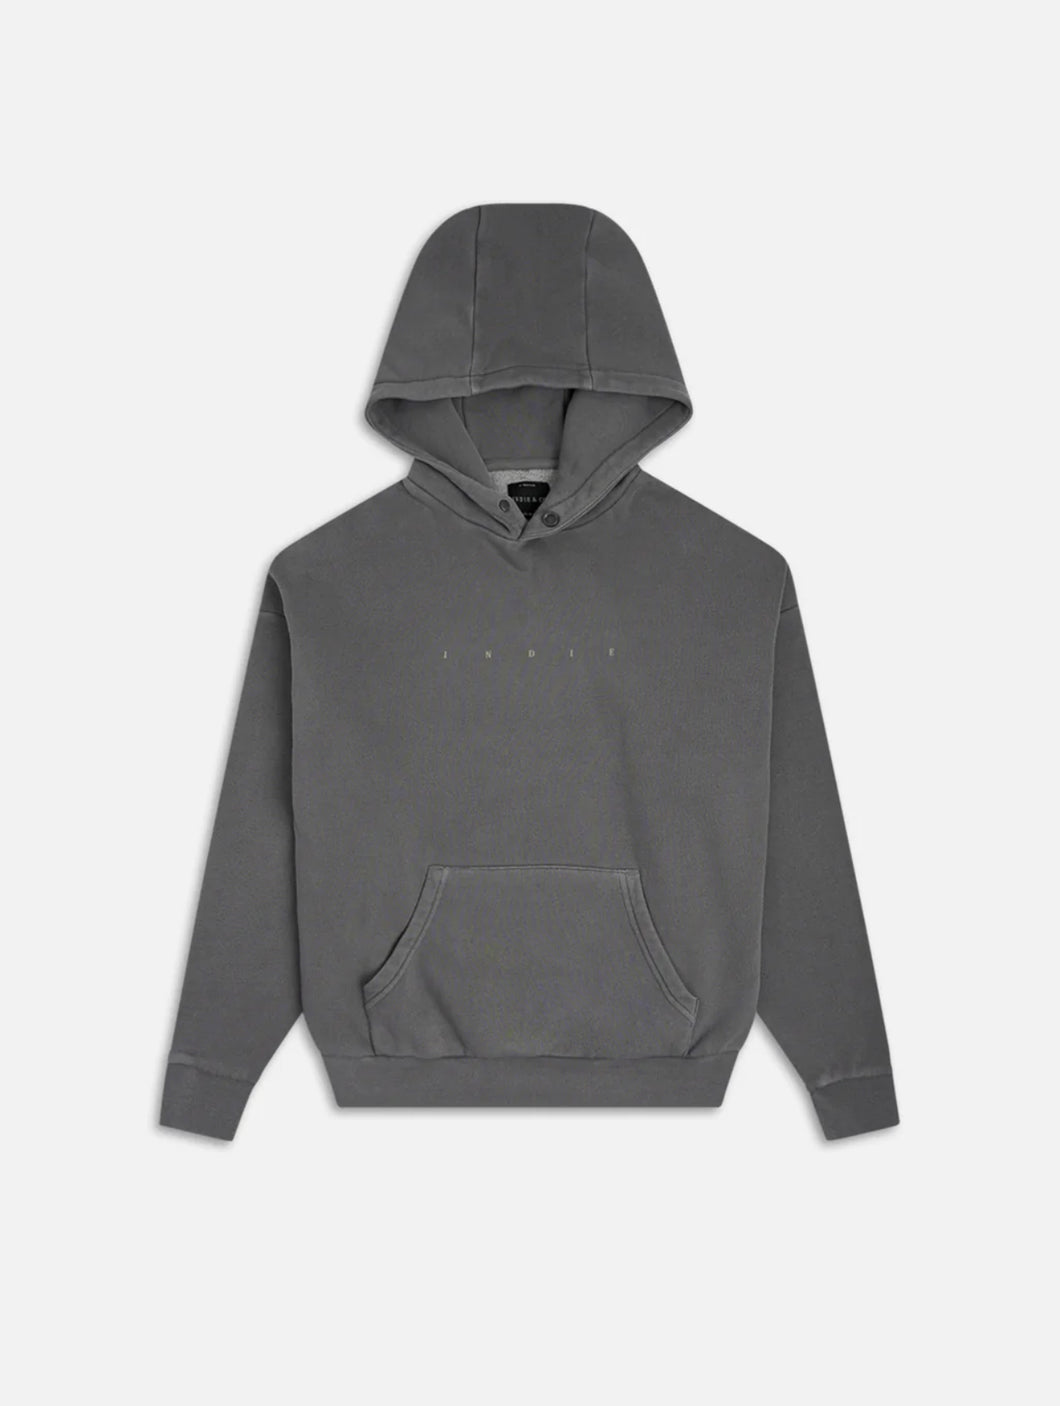 THE OVERSIZE HOODIE - CHARCOAL